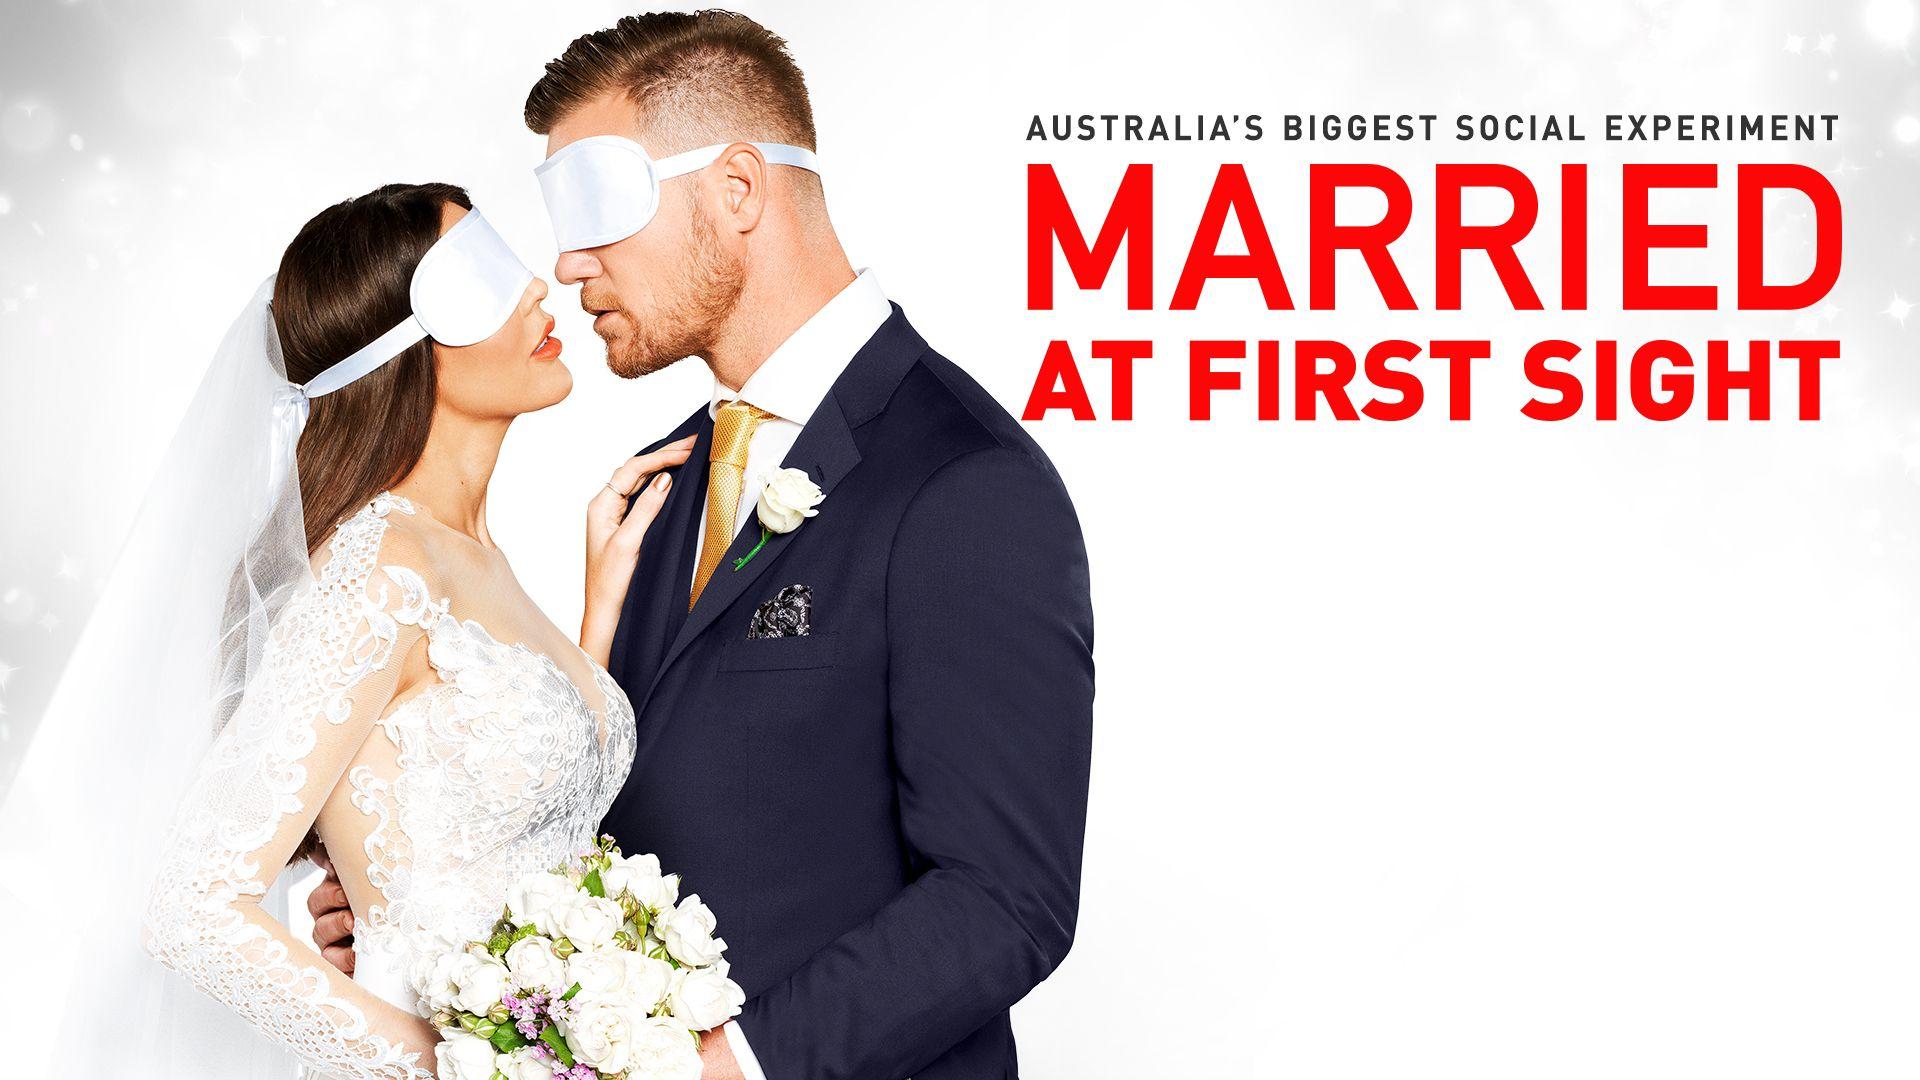 Married at first sight domenica only fans